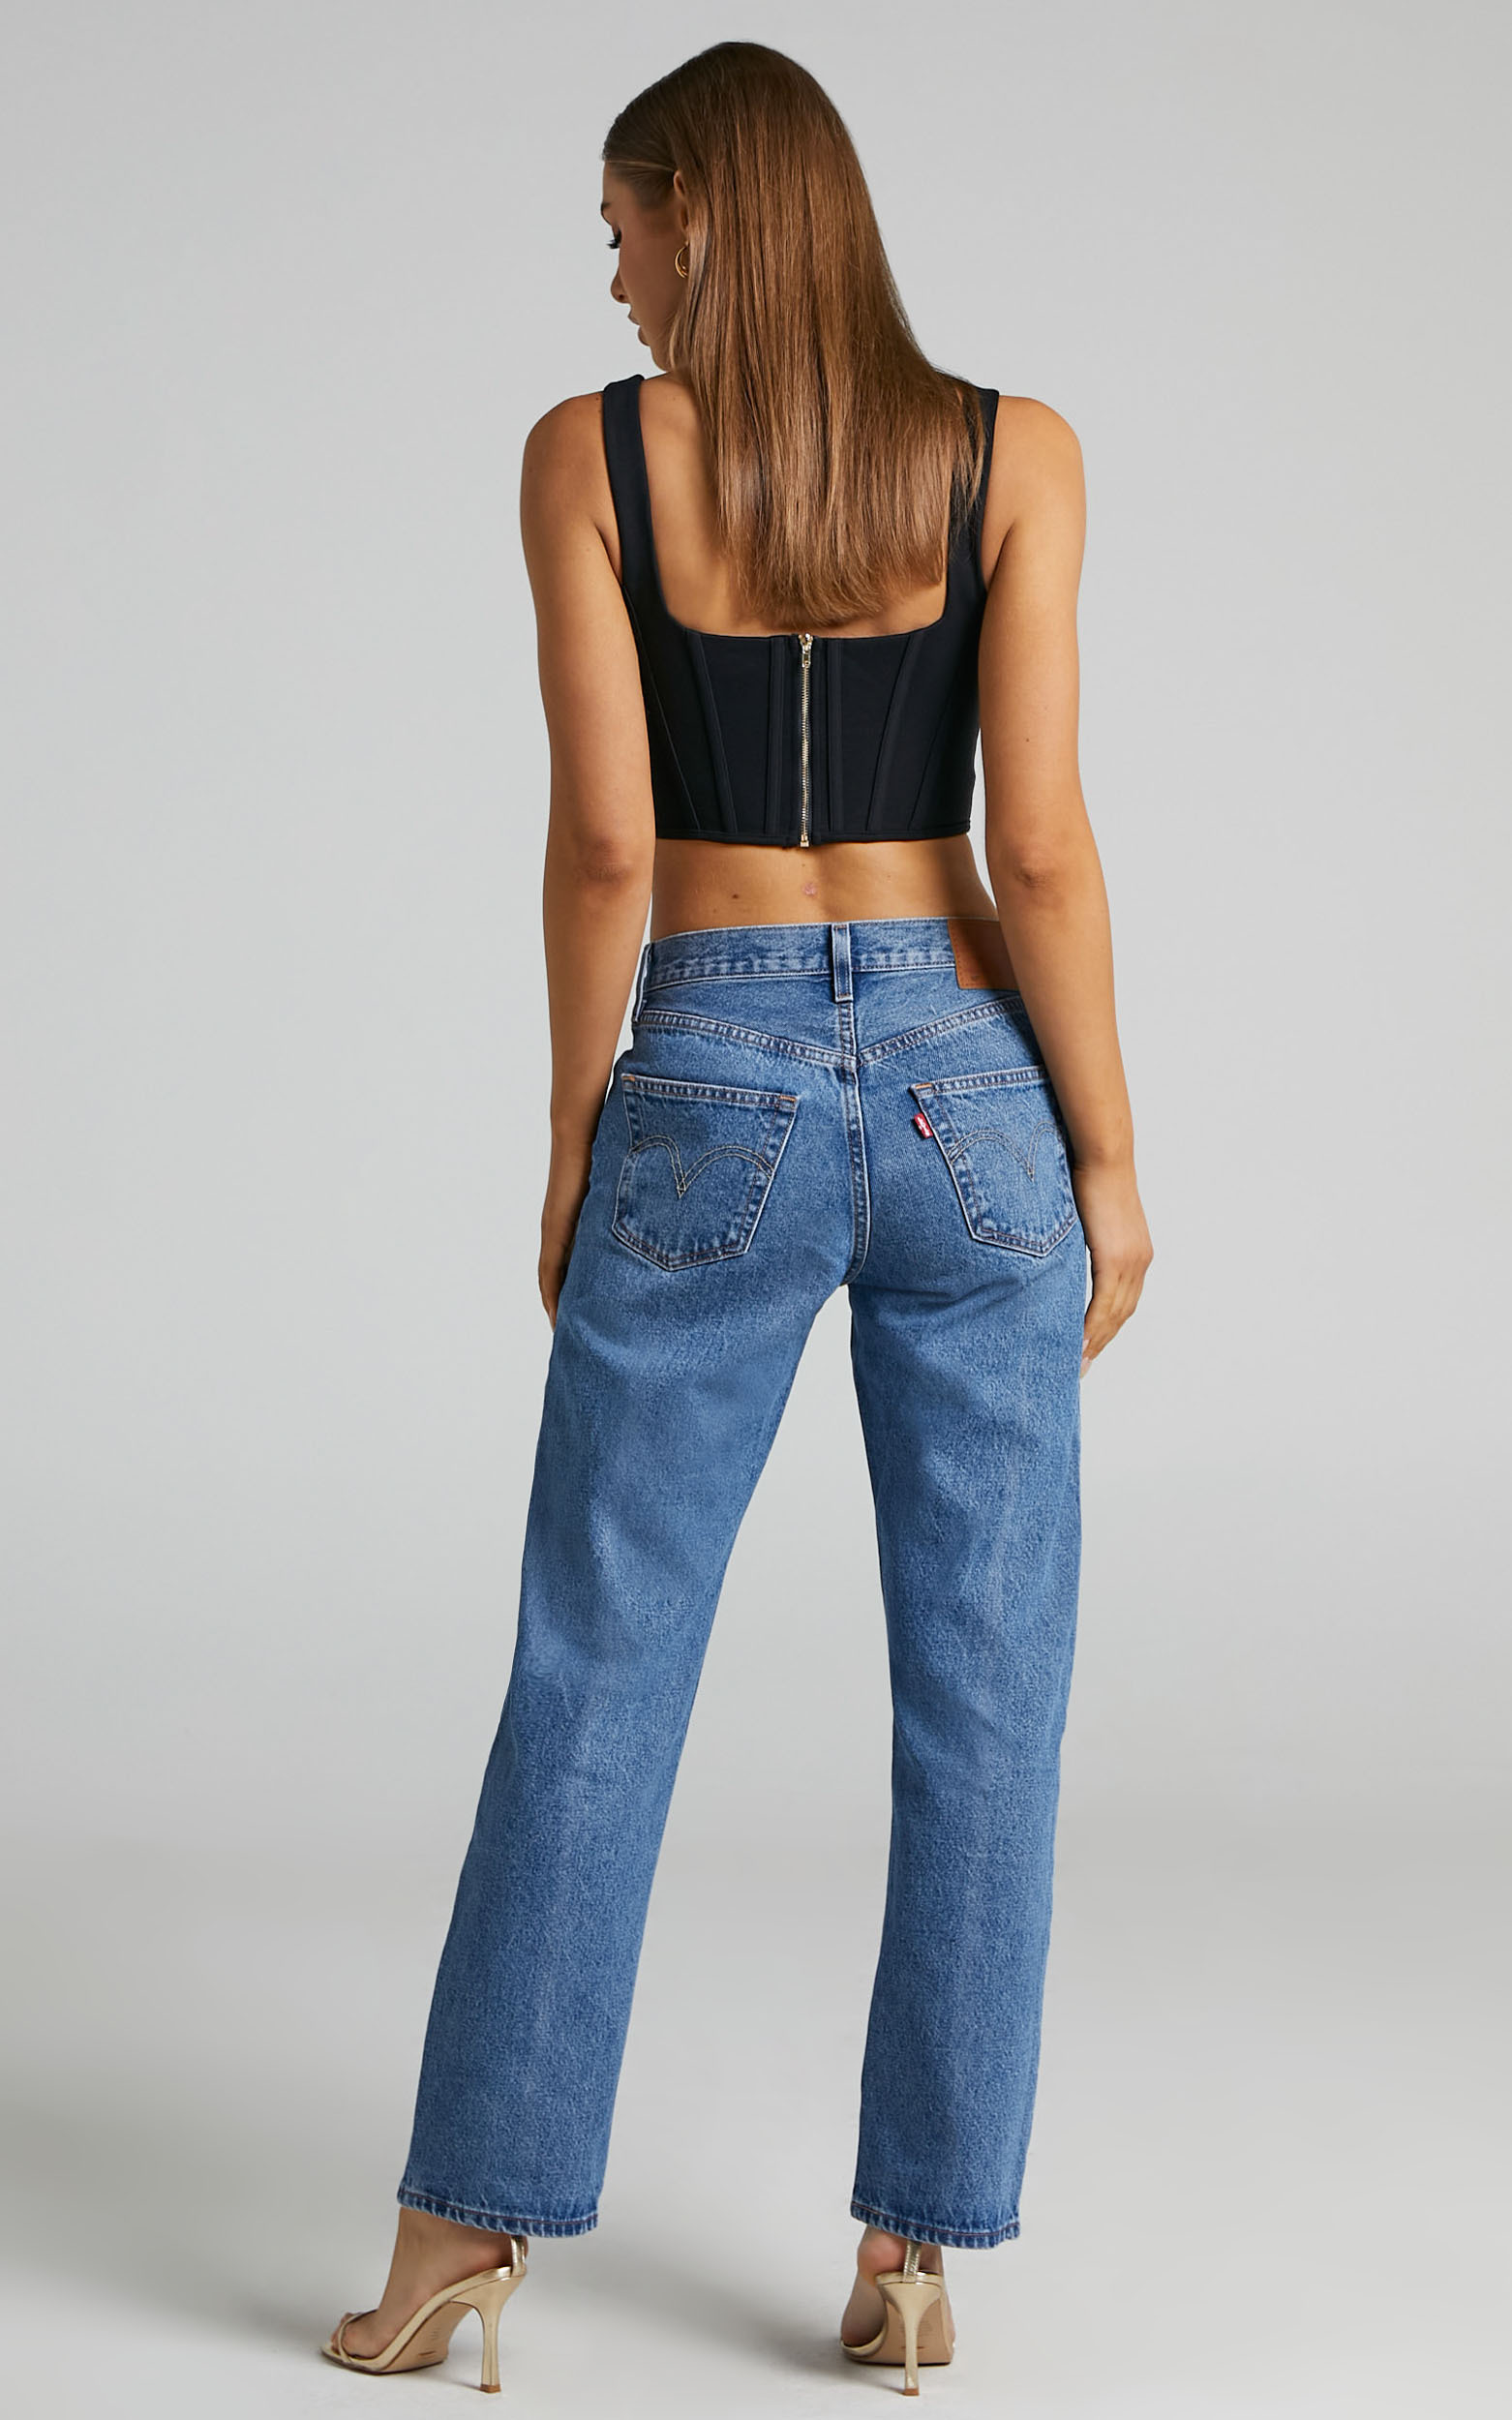 Levi's - 90s 501 Jeans in Drew me in - 06, BLU1, hi-res image number null